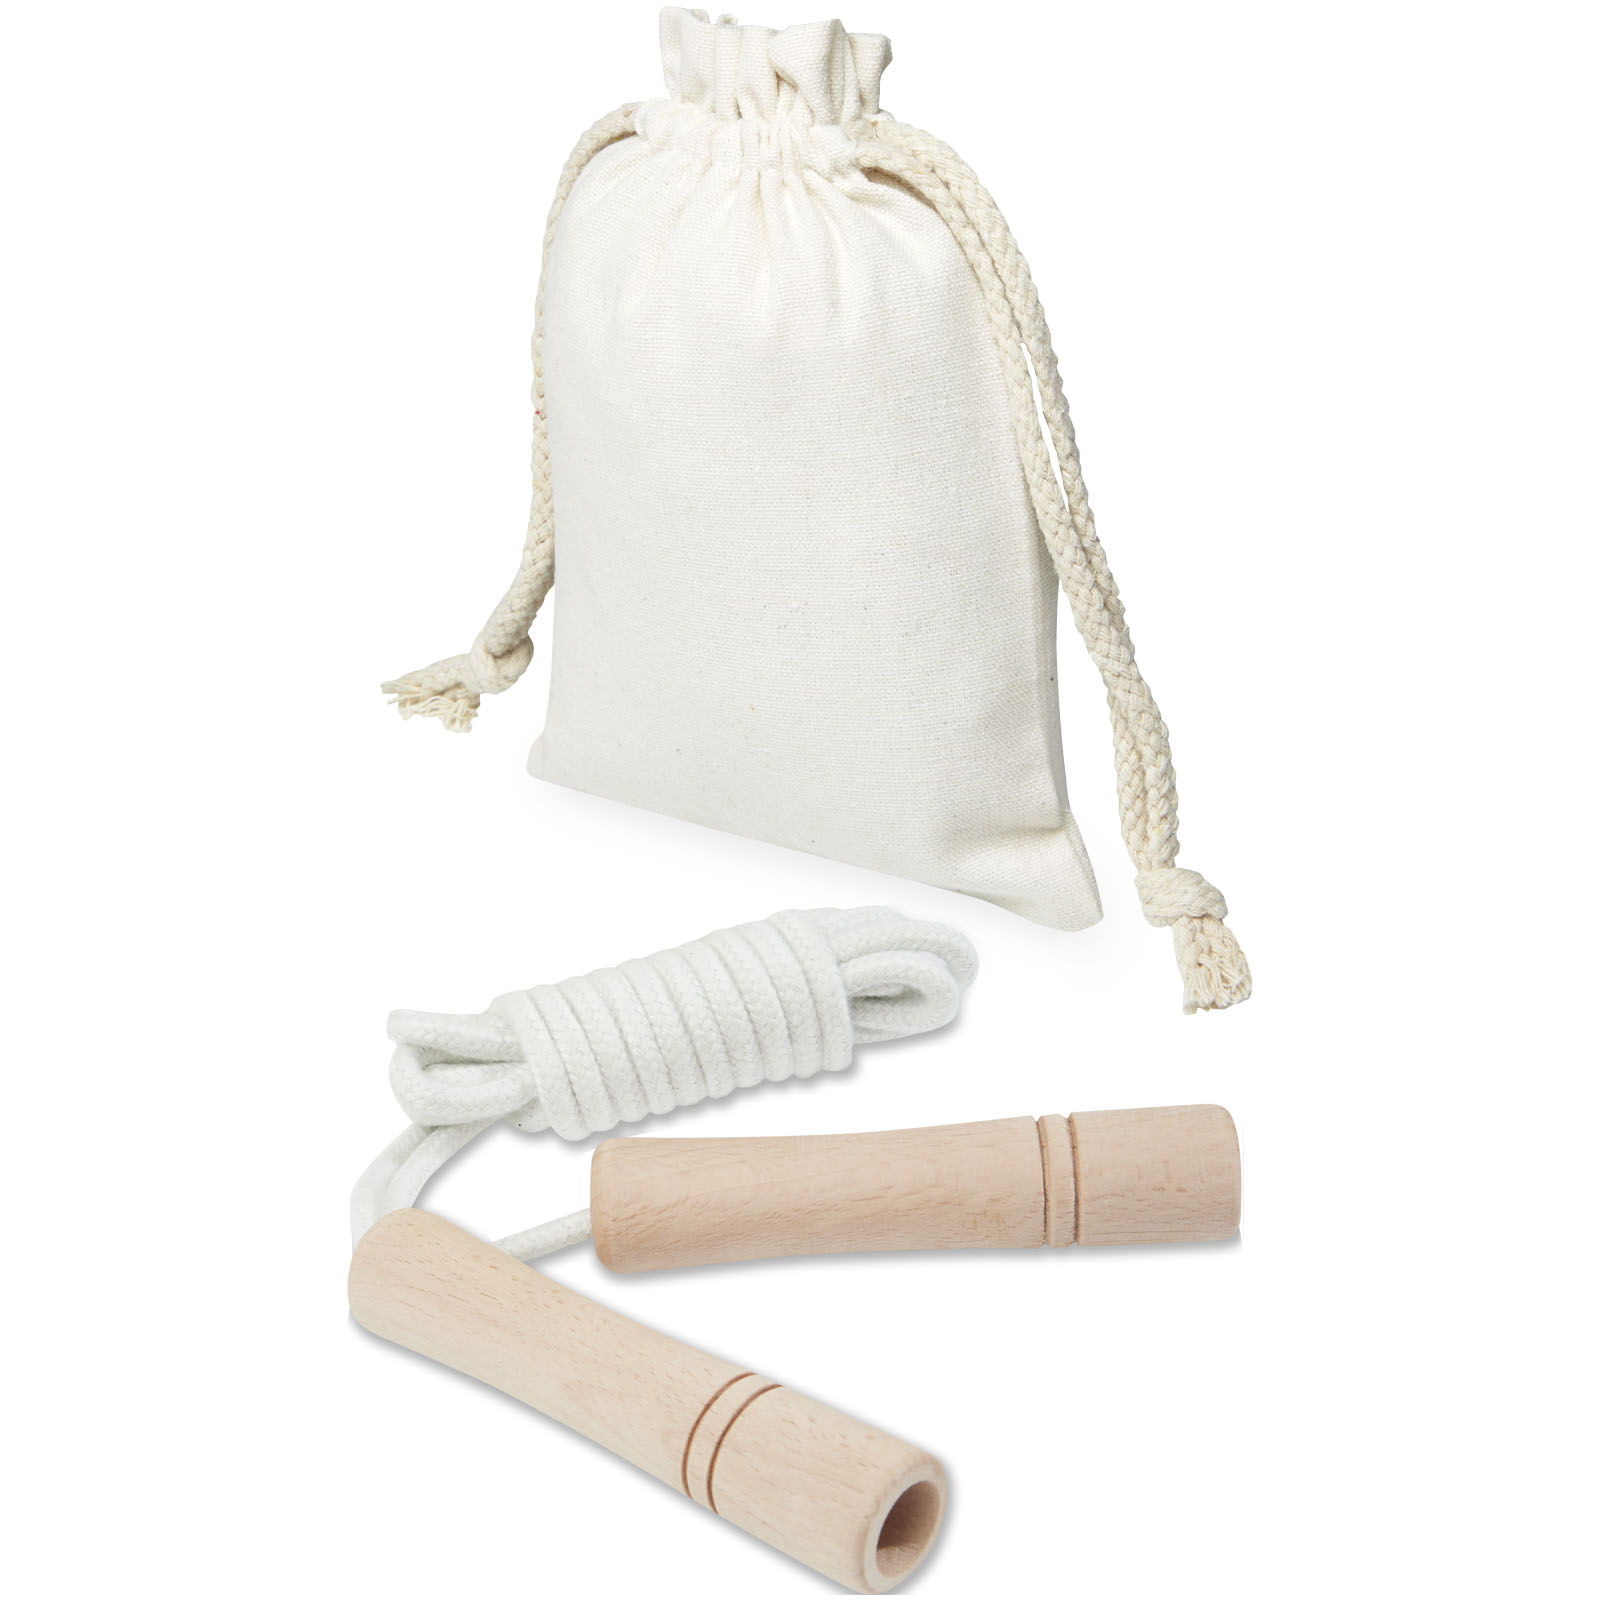 Sports & Leisure - Denise wooden skipping rope in cotton pouch